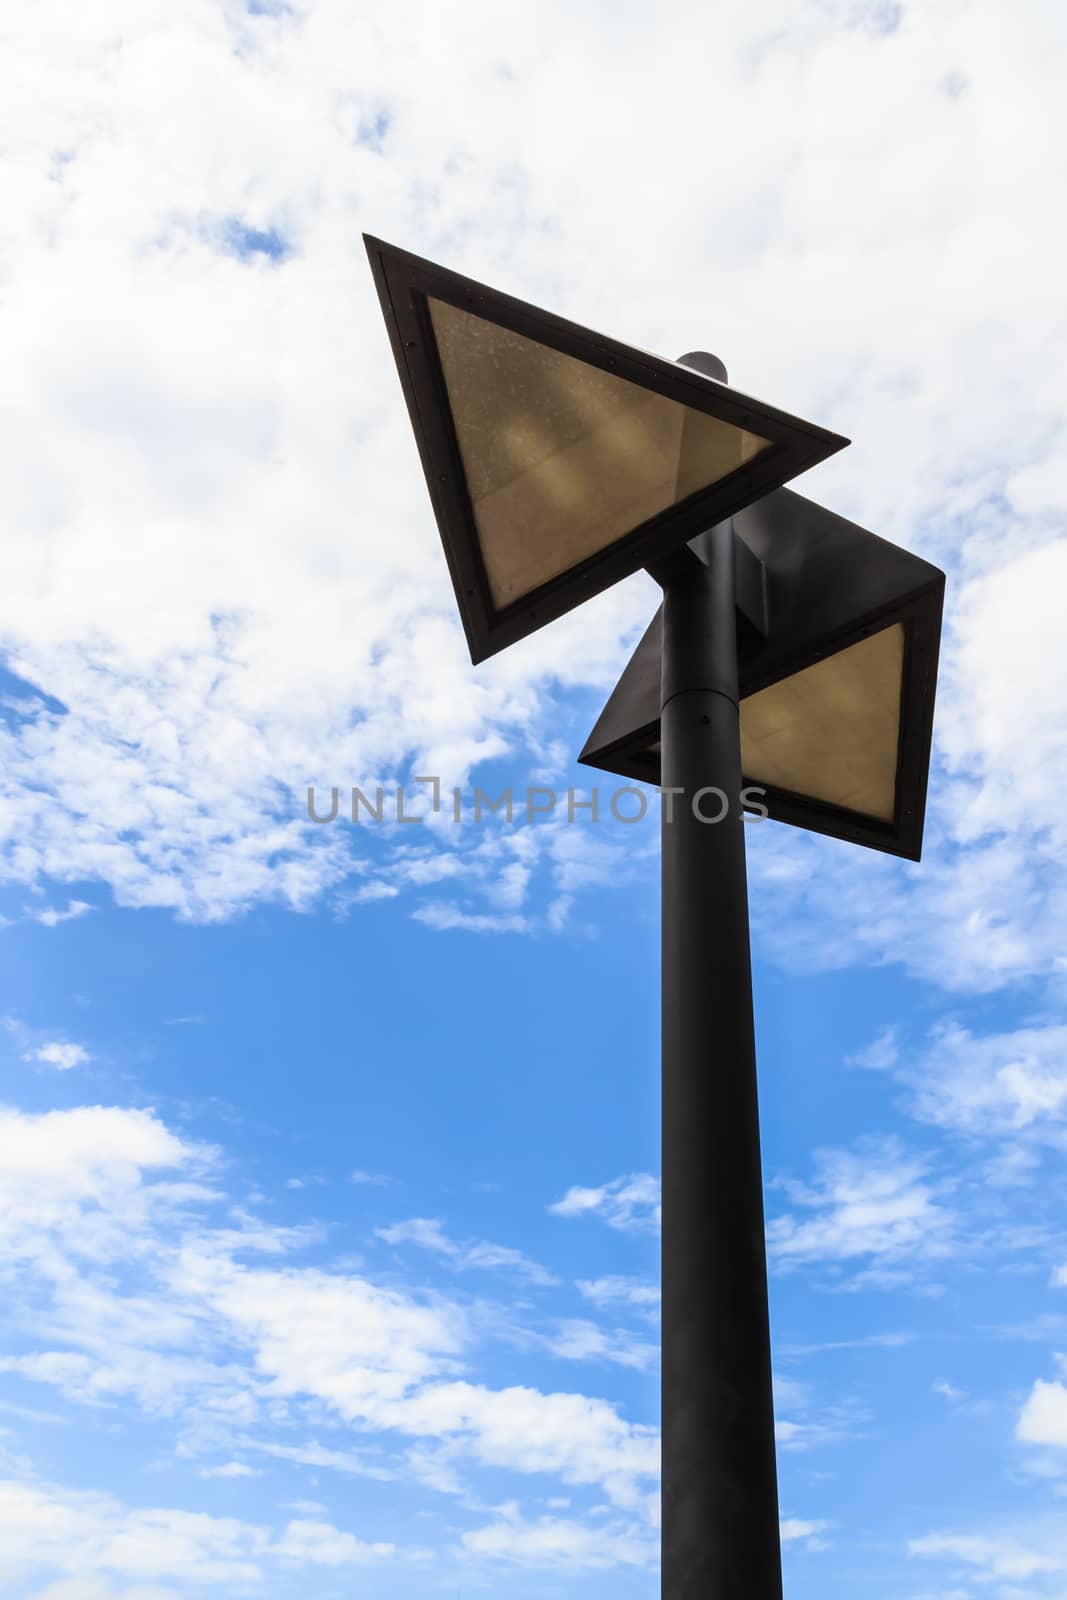 Triangle-shaped Street Lamp against White Cloud and Blue Sky by punpleng